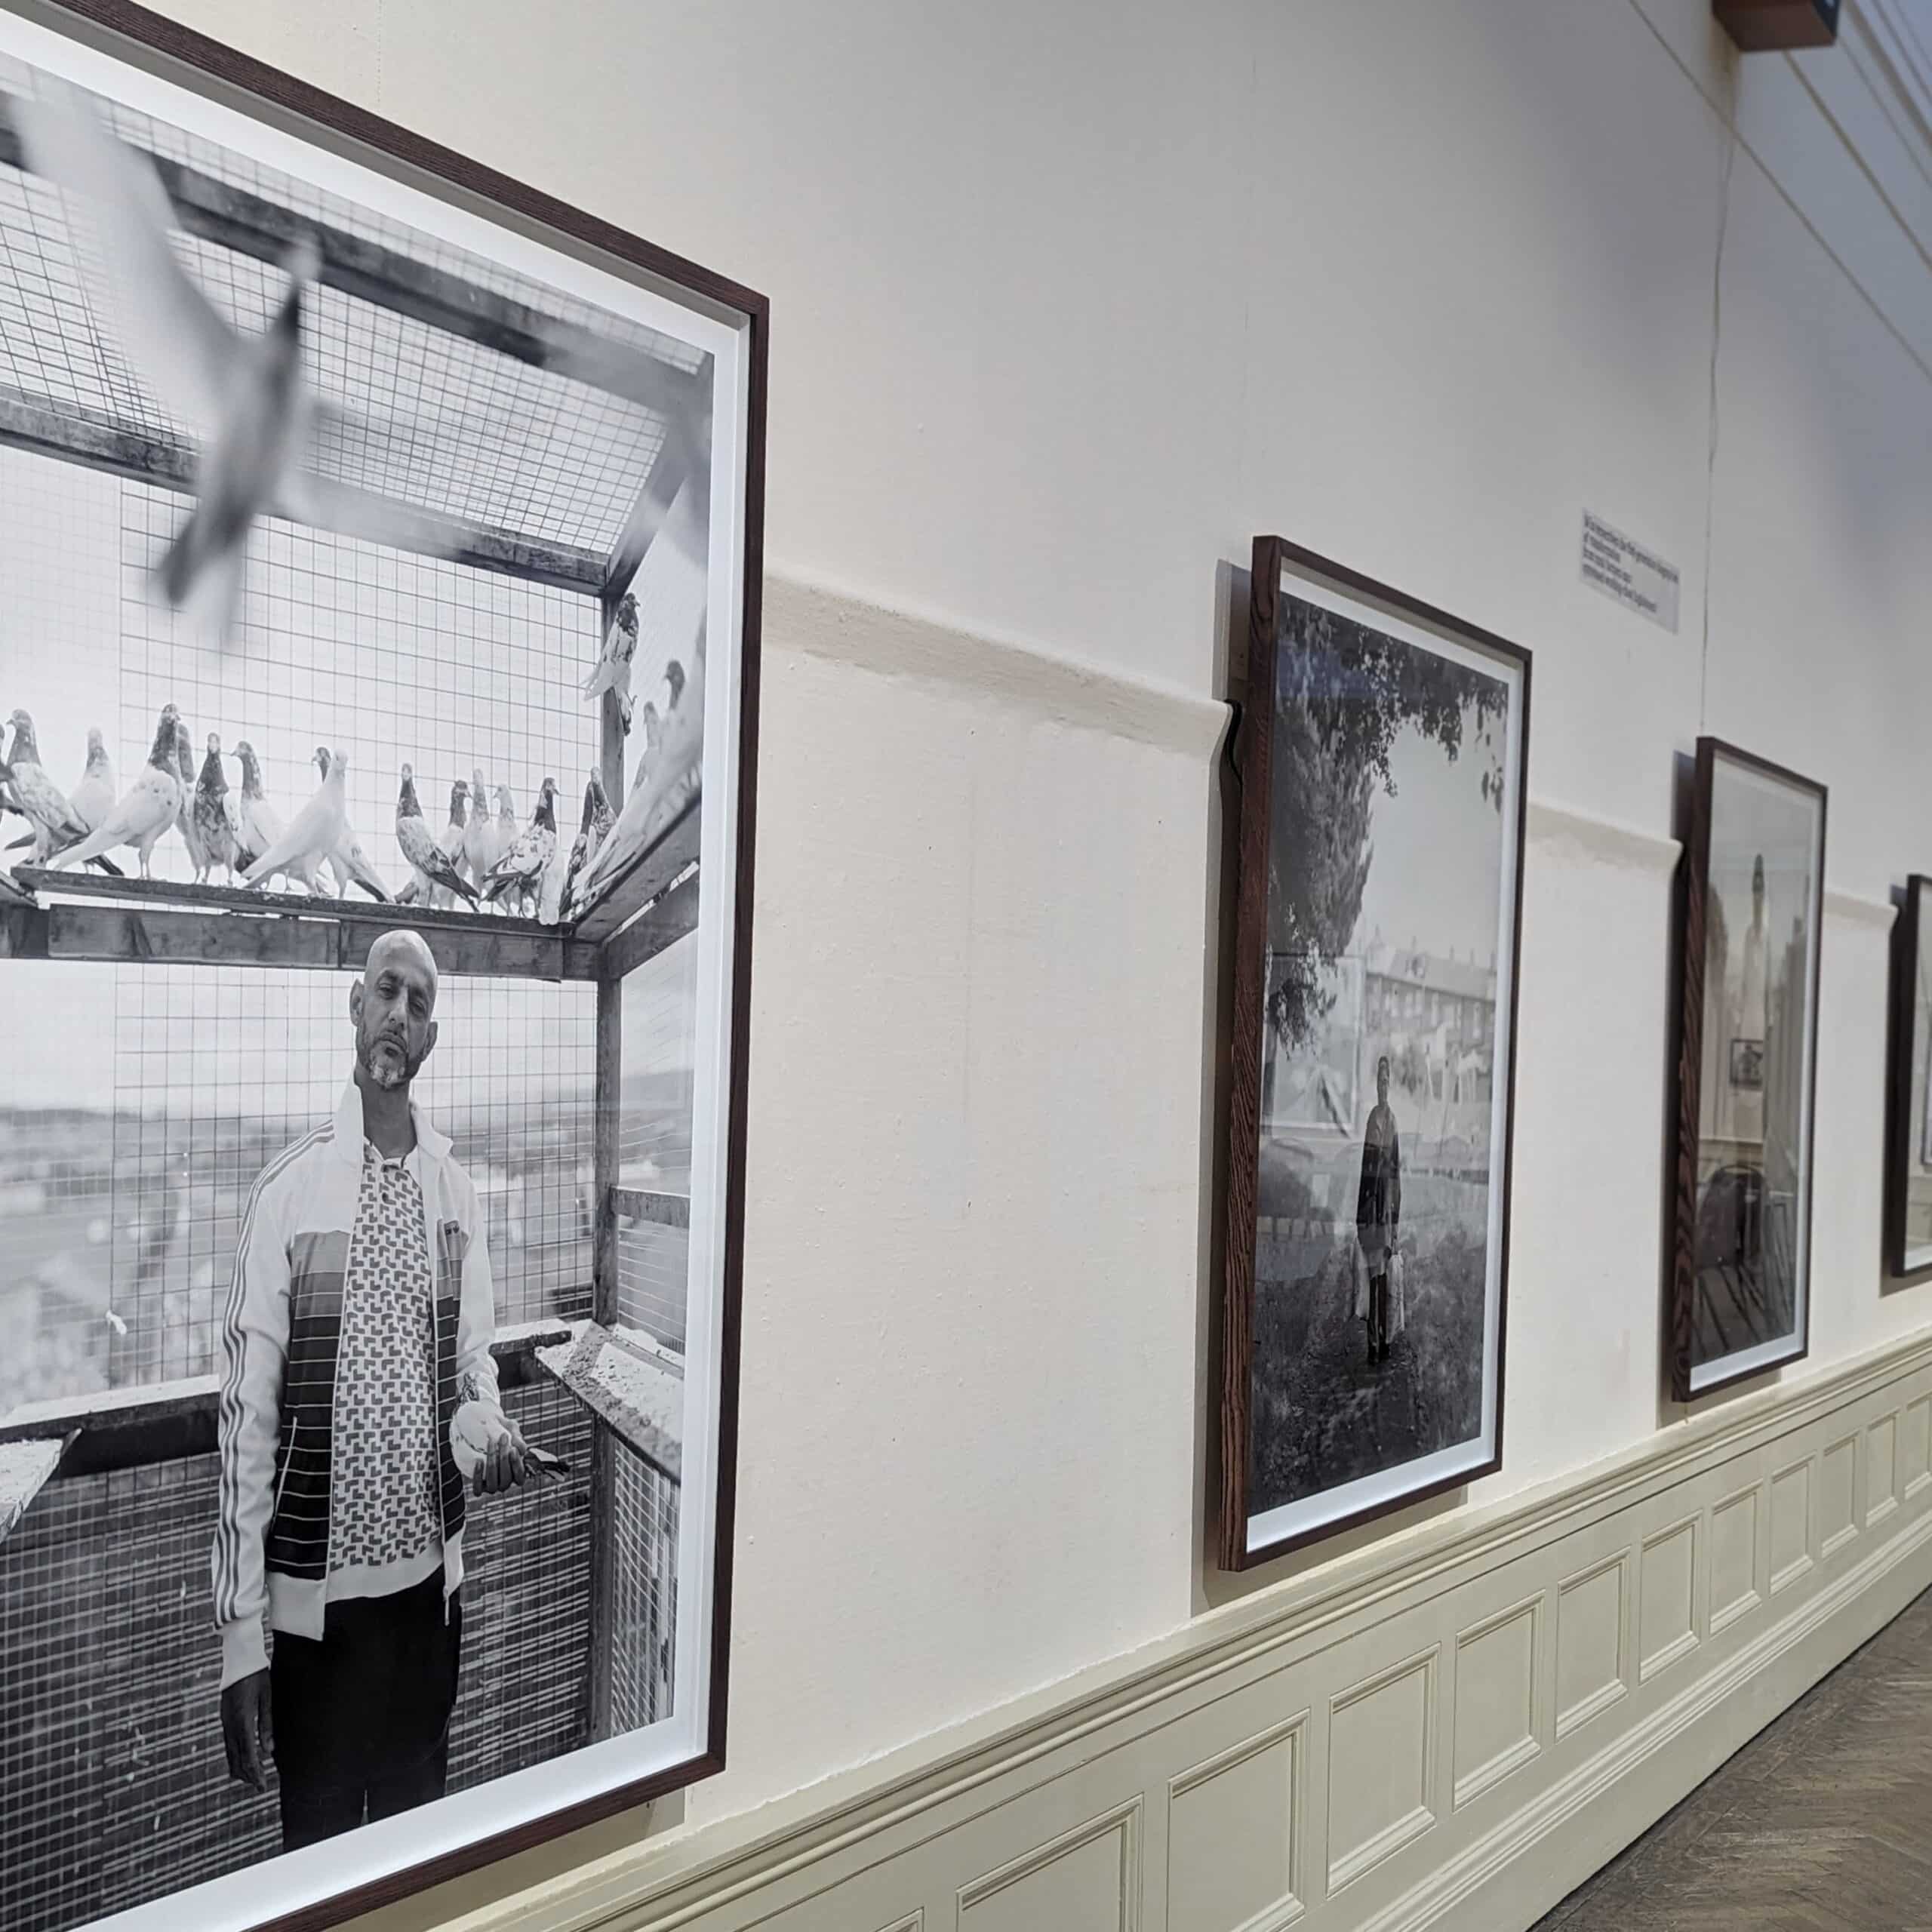 Photograph of three large black-and-white photos on wall of a gallery. From Craig Easton's exhibition Is Anybody Listening?